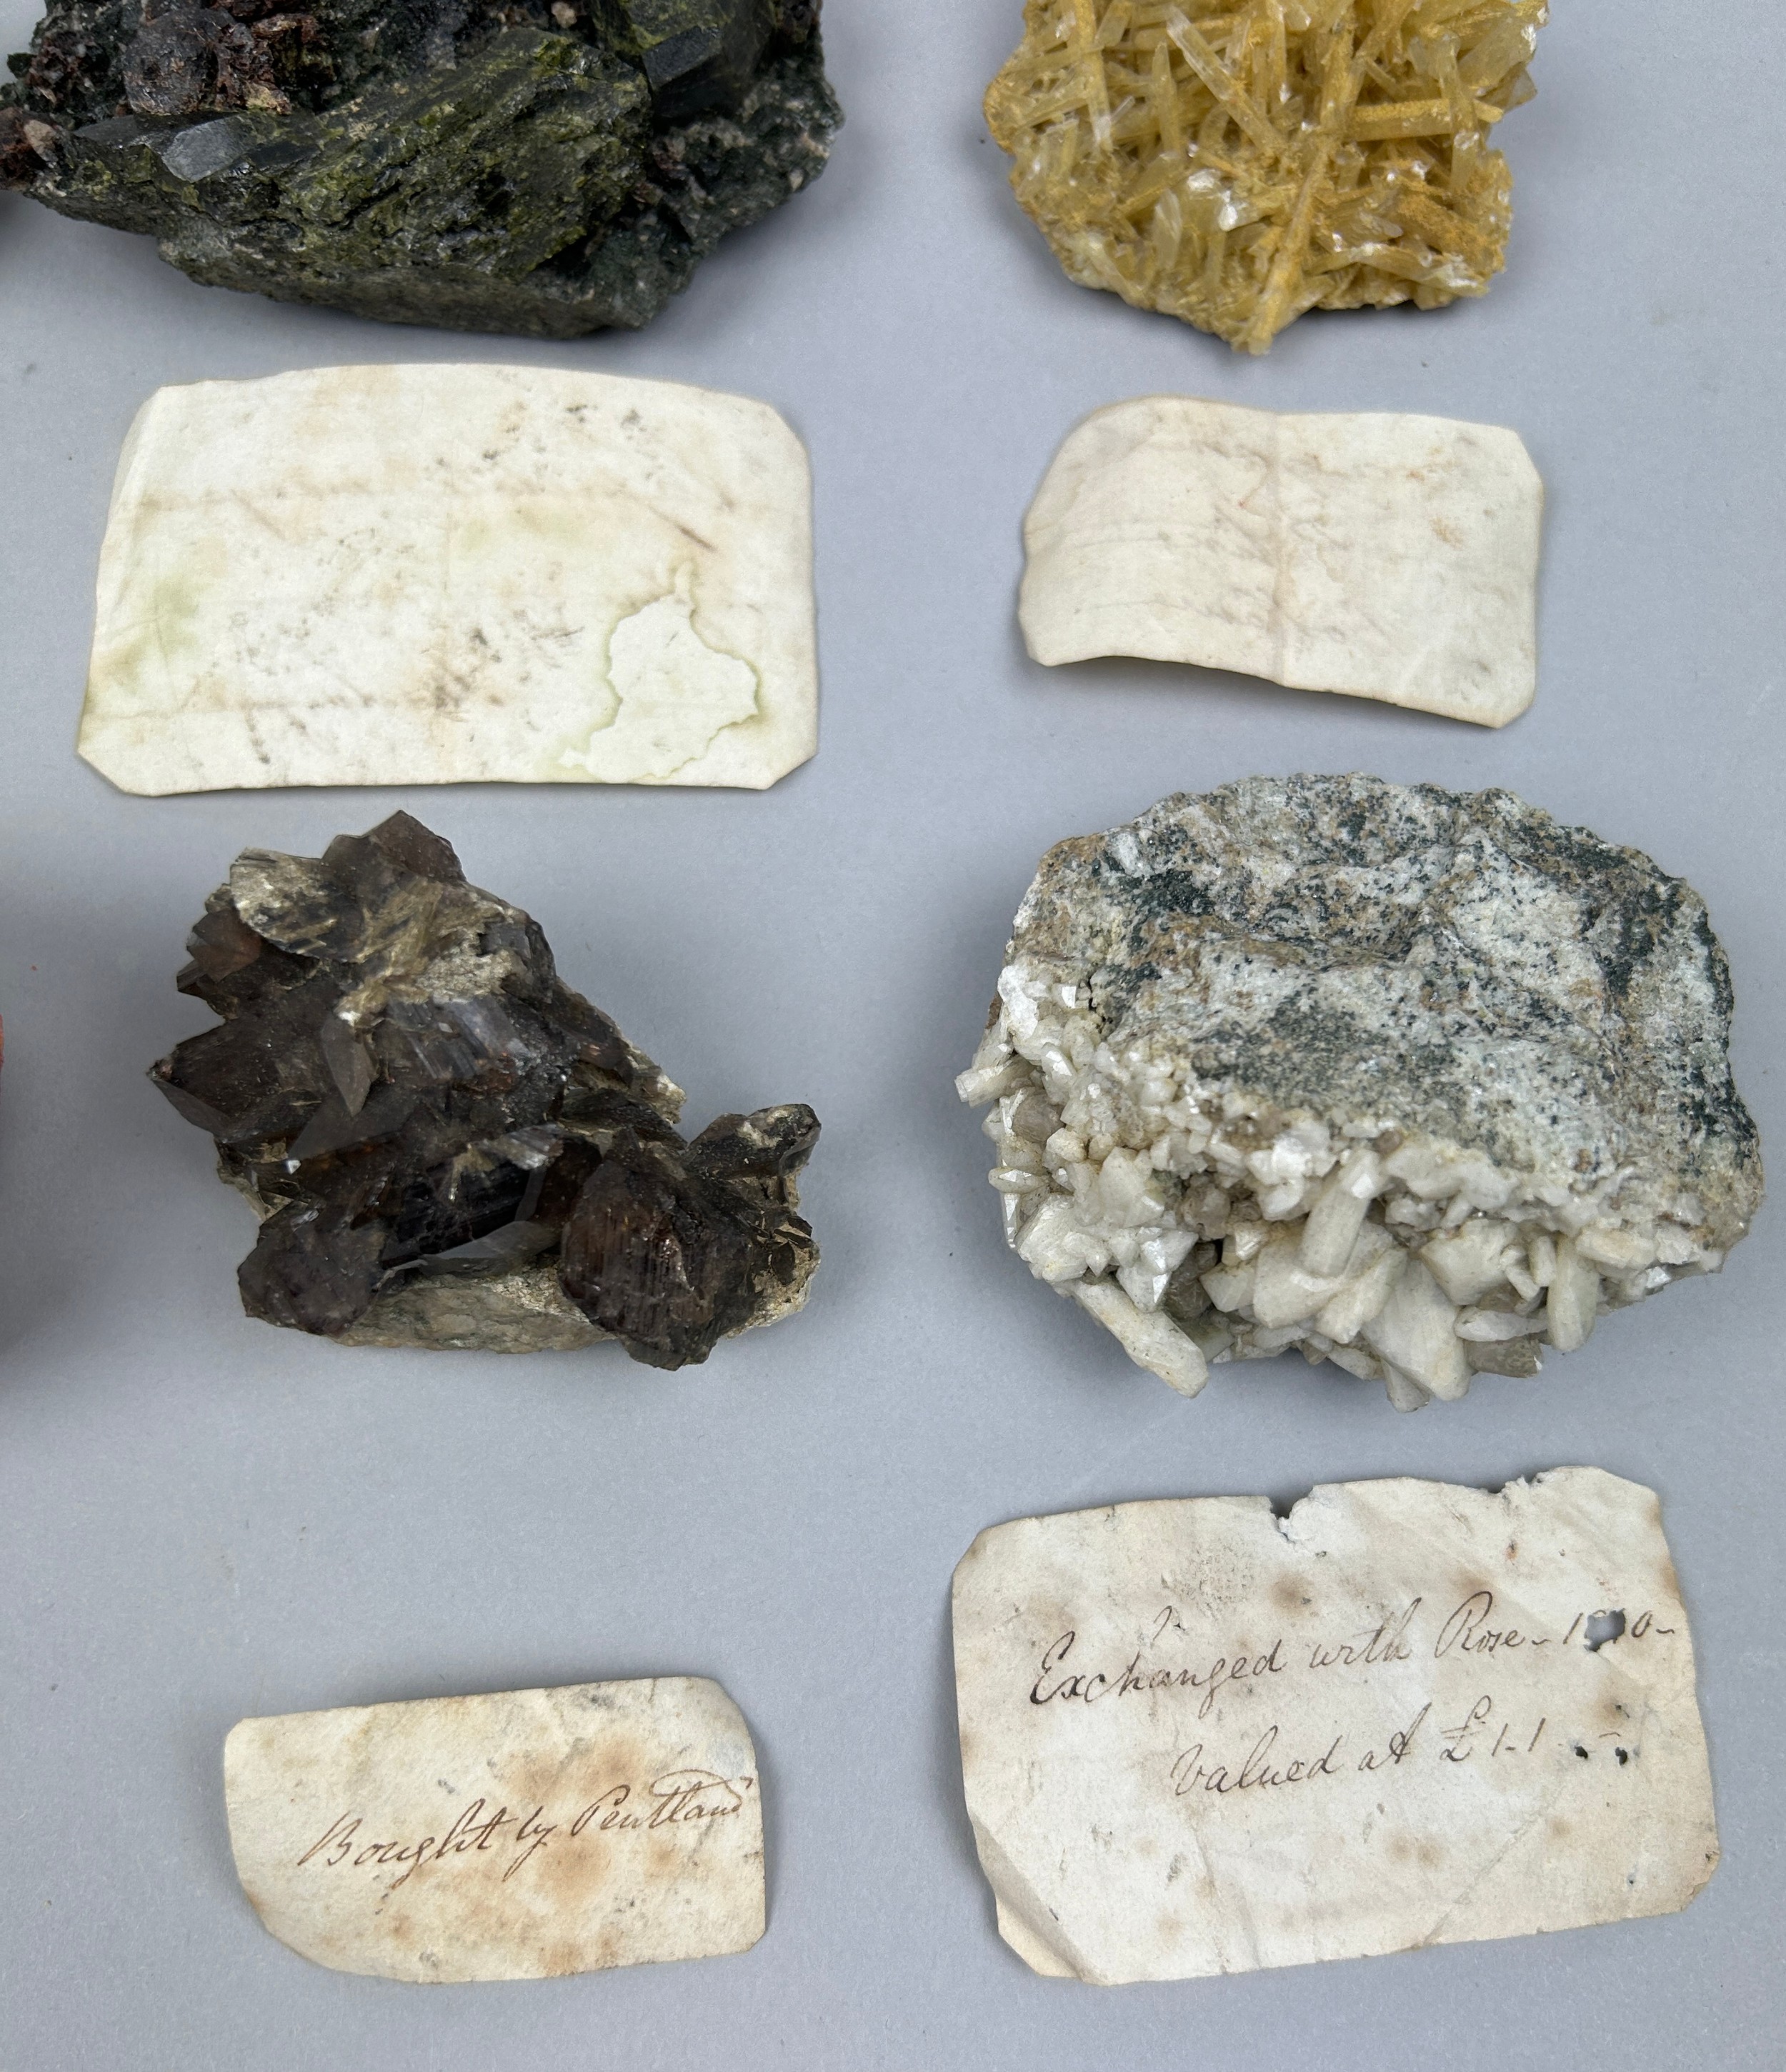 A RARE CABINET COLLECTION OF MINERALS CIRCA 1810-1860, including labels for some very important - Image 14 of 30